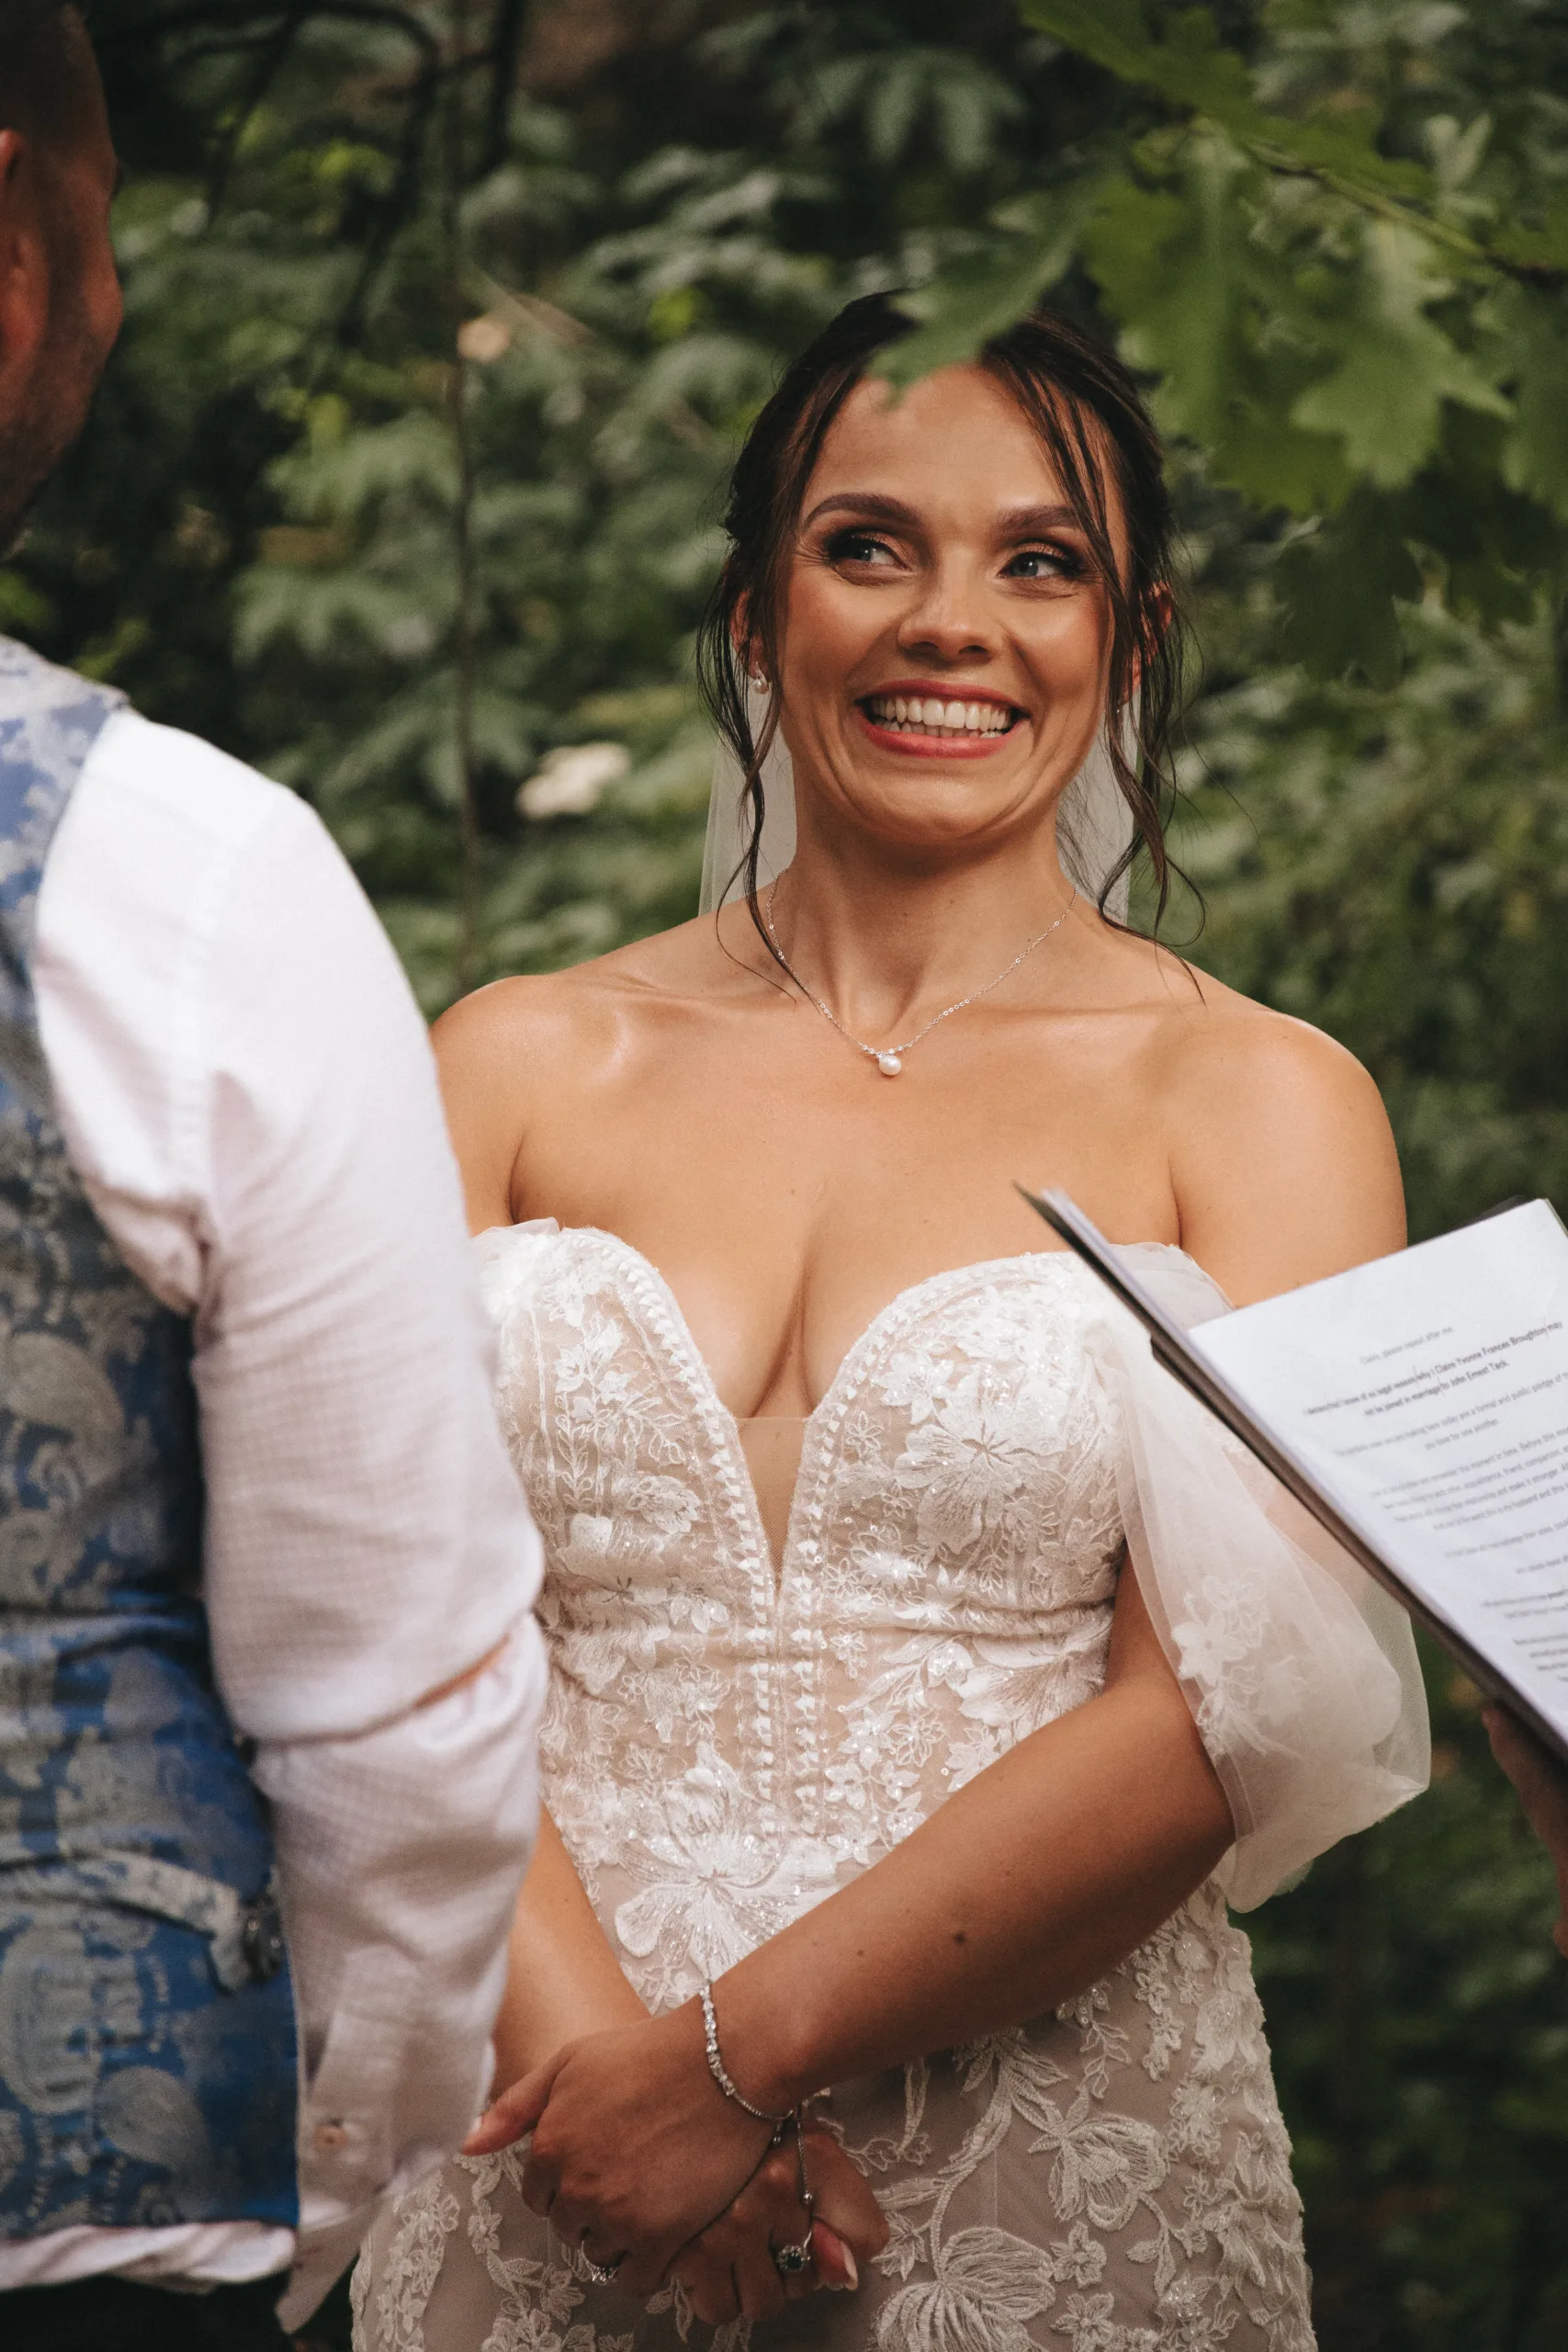 A Yorkshire bride smiles as she reads her vows in the woods, captured beautifully by a photographer.